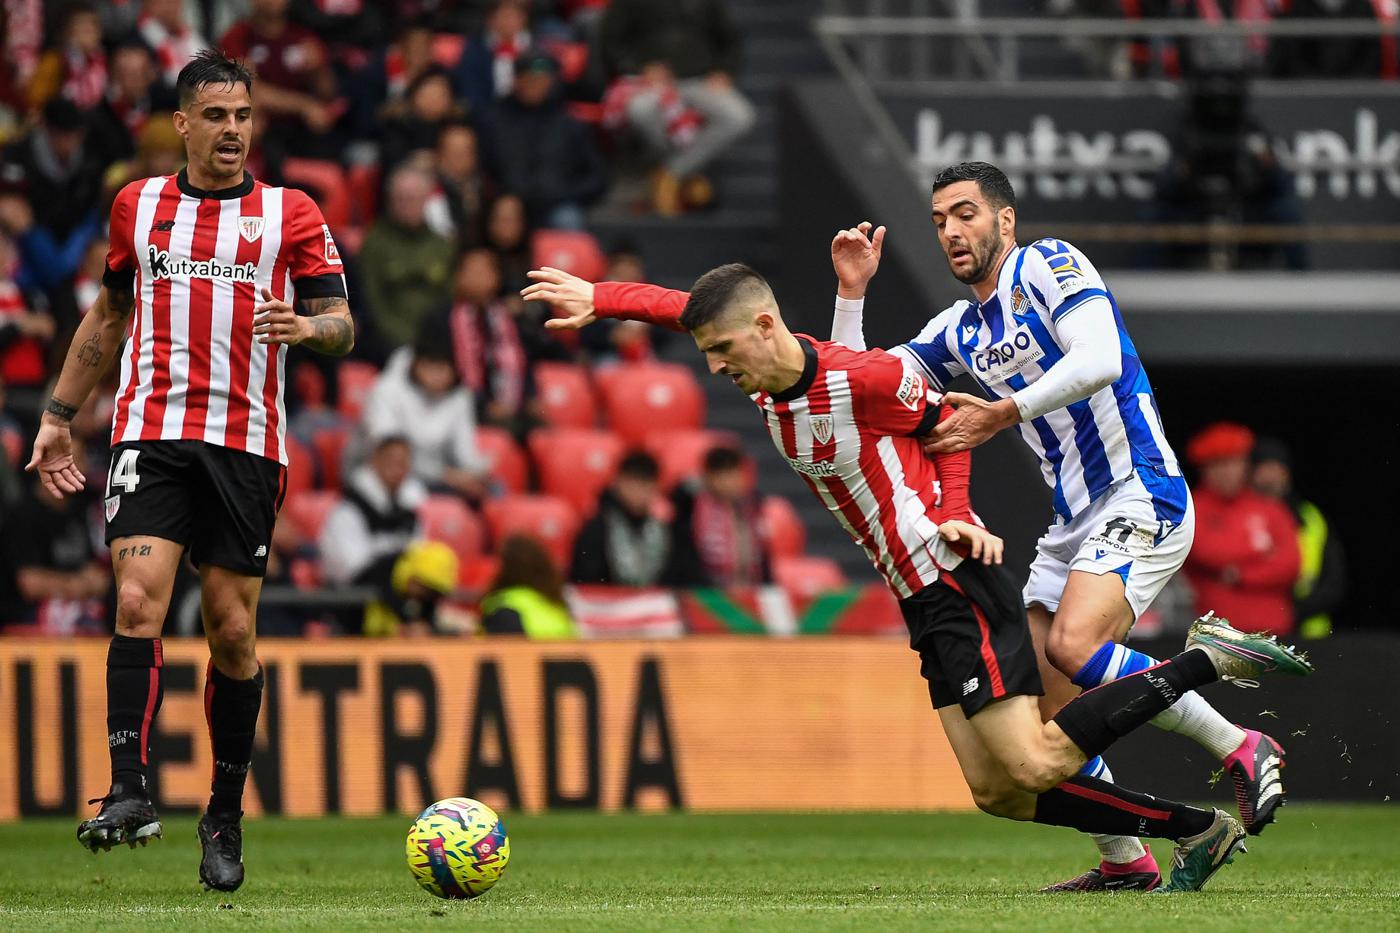 Athletic - Real S-Dad - 2:0. Spanish Championship, round 29. Match review,